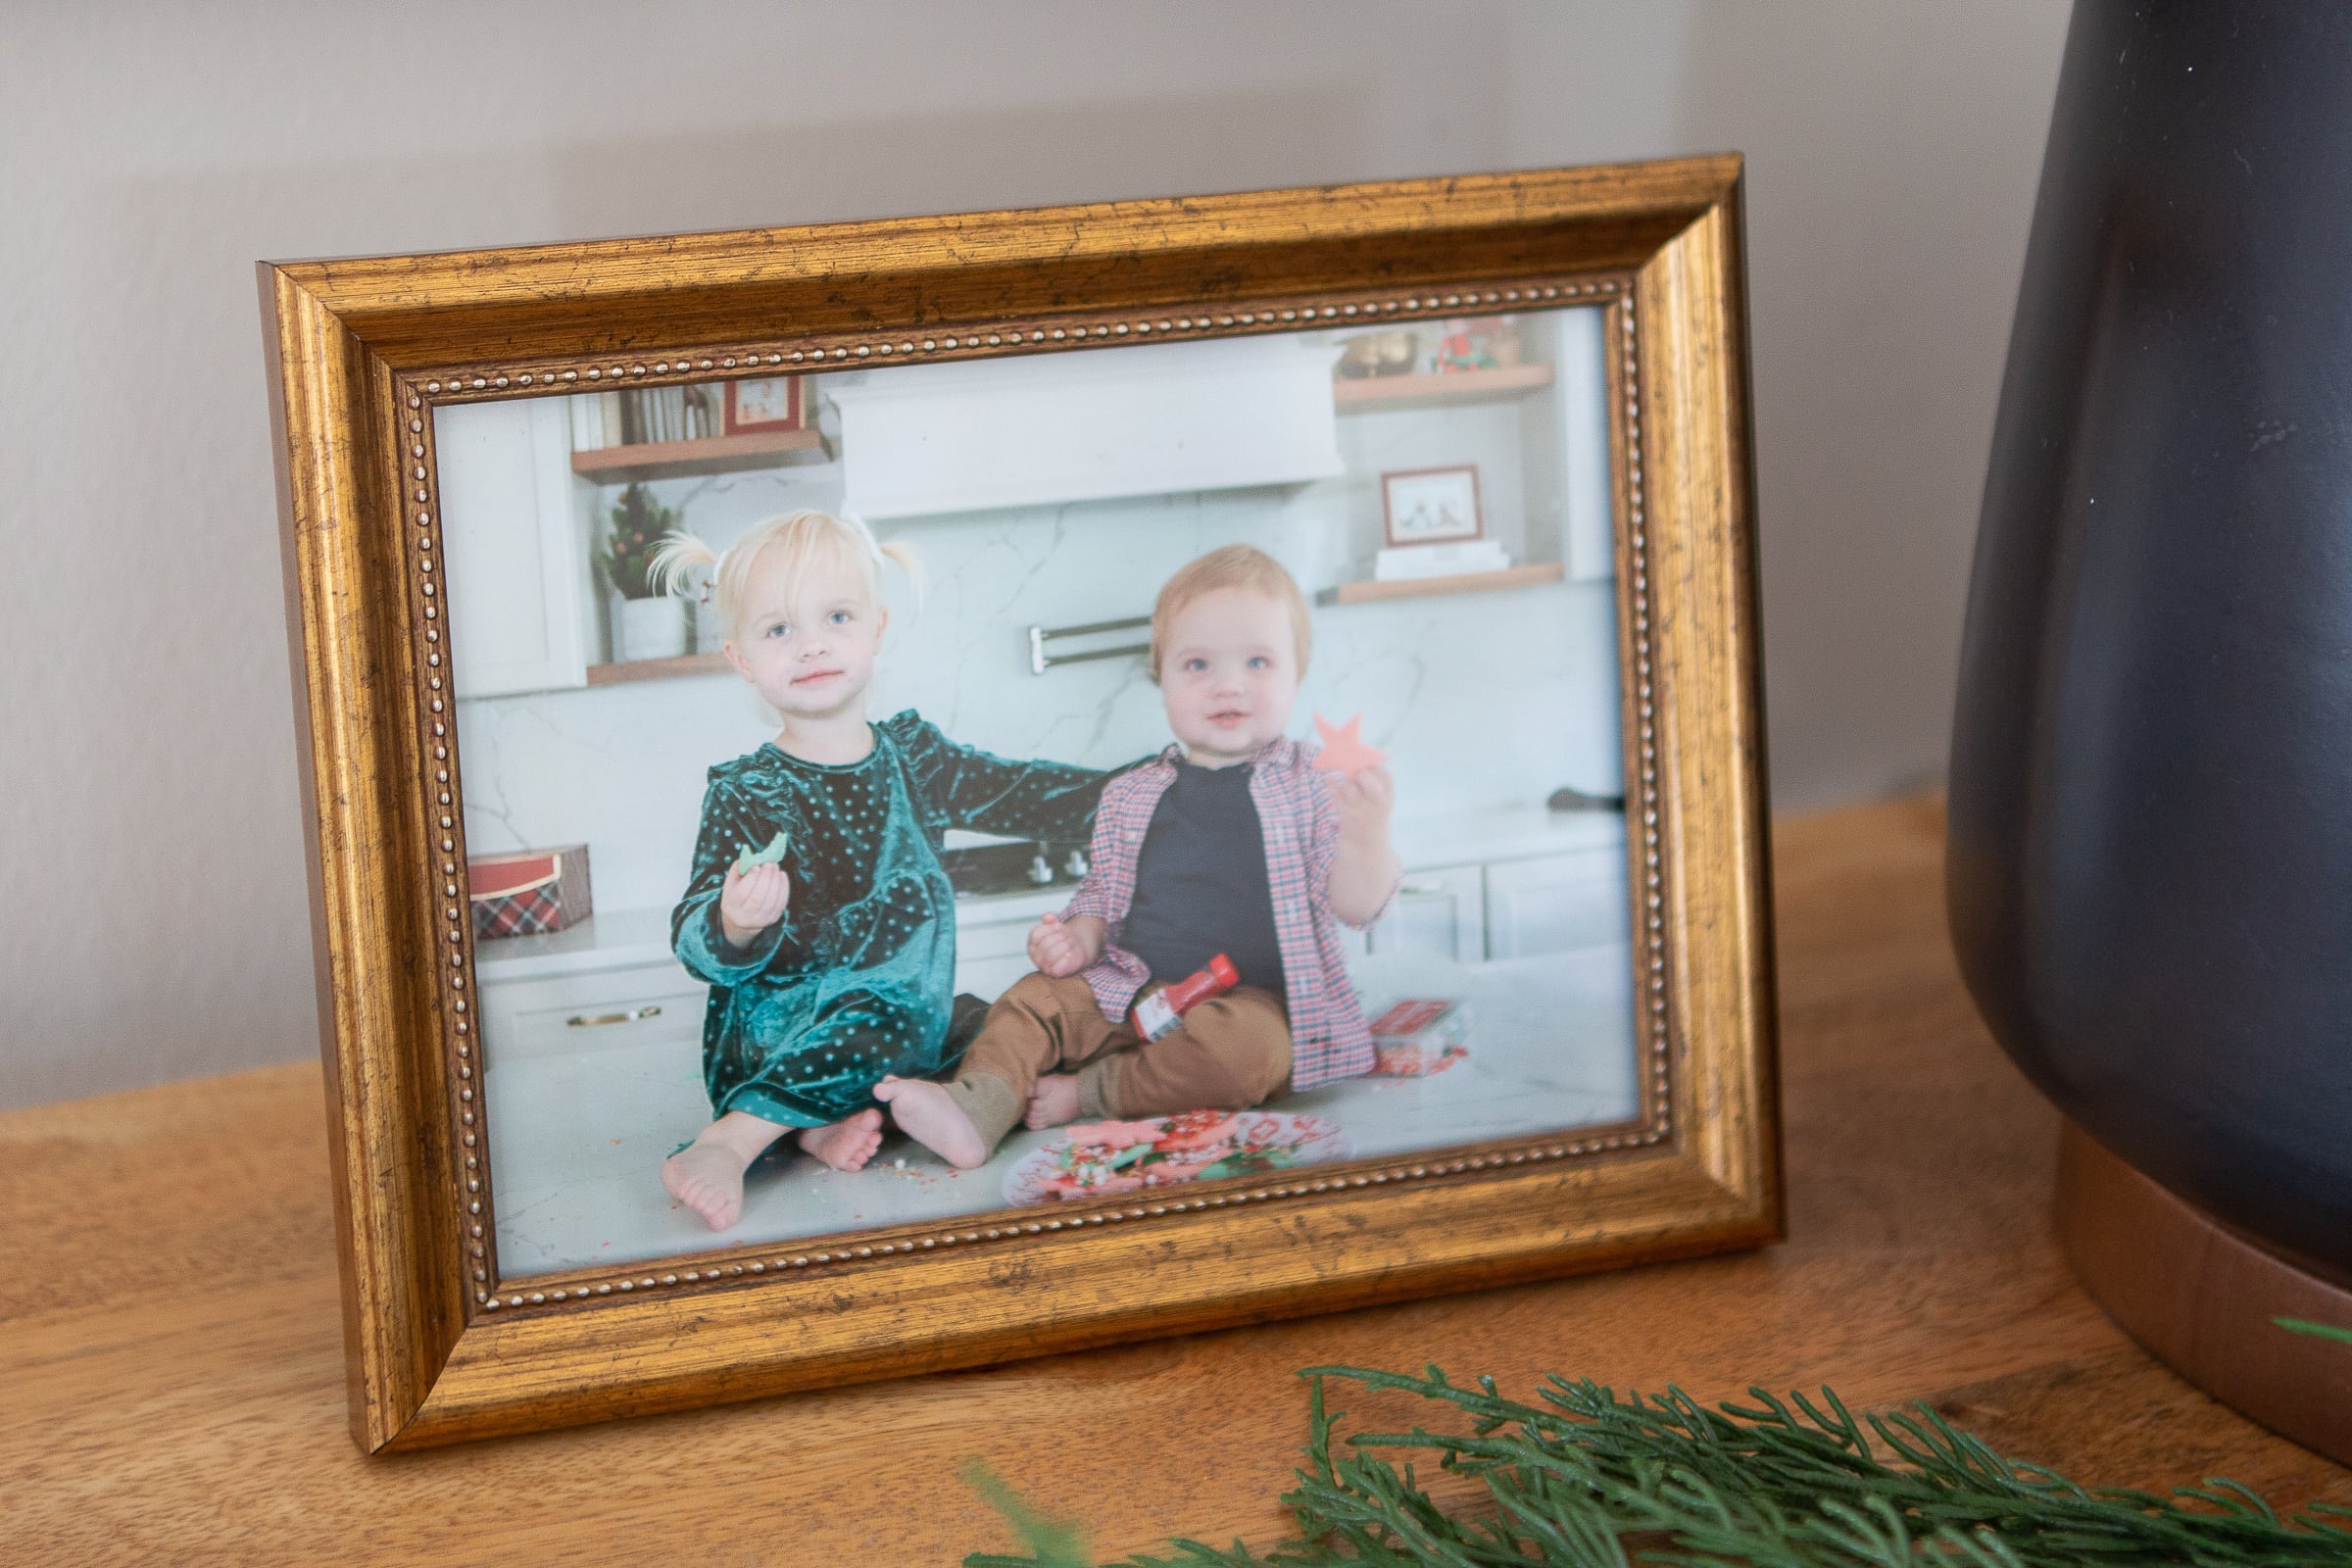 Photos welcoming you to our simple holiday home tour